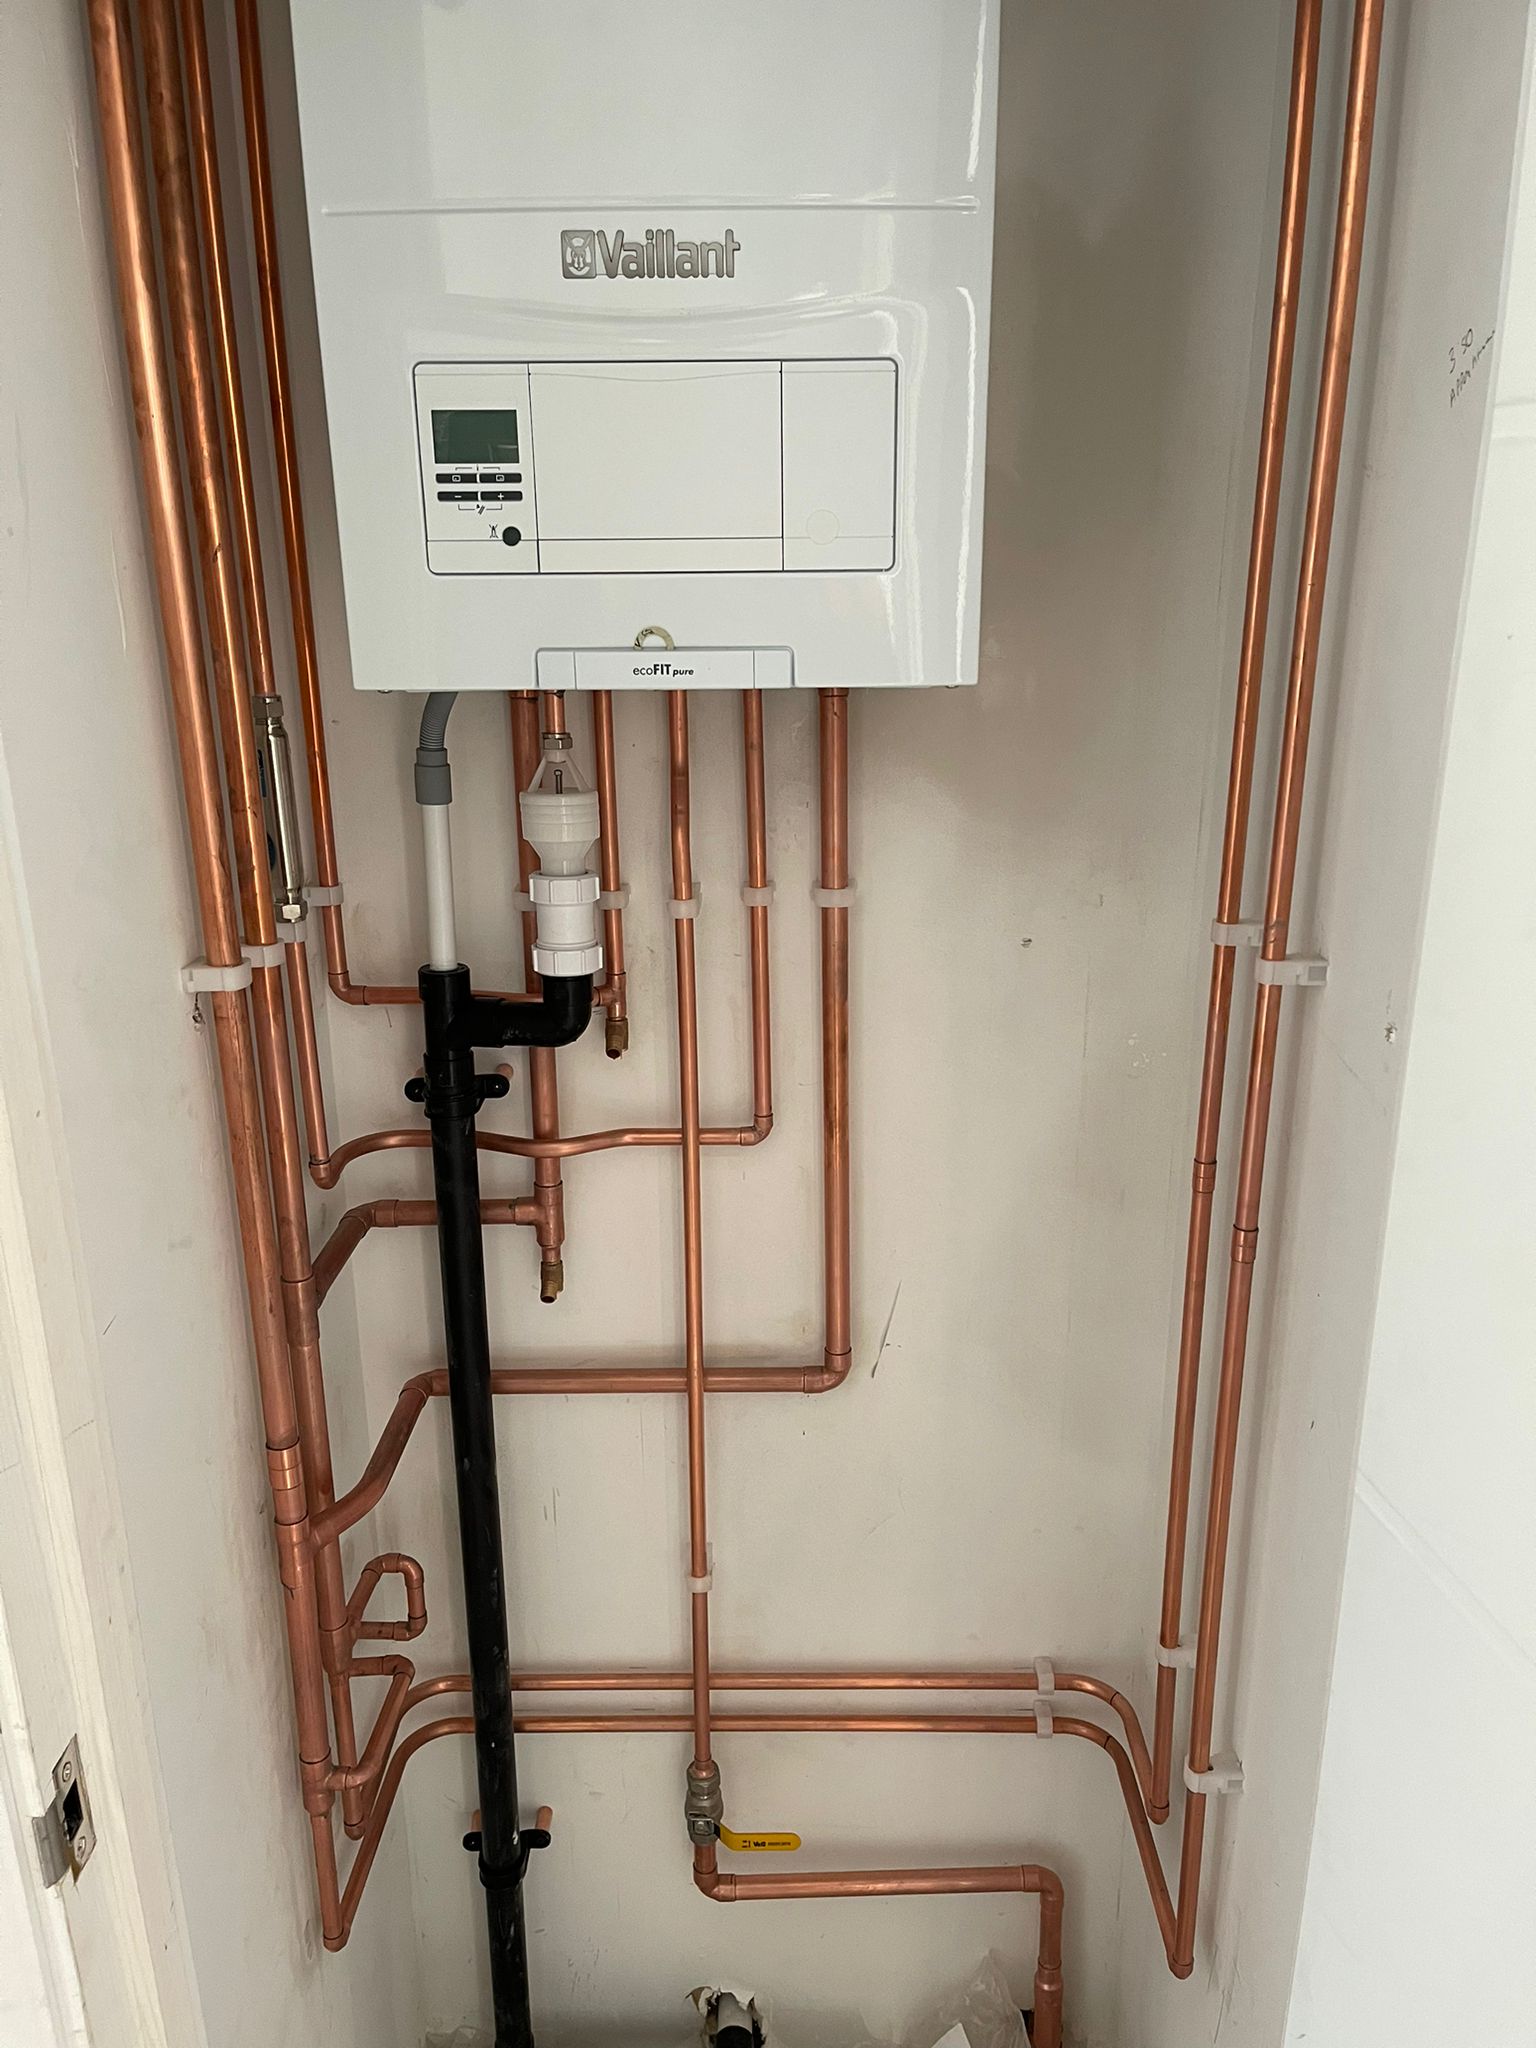 New Vaillant Boiler Installation with exposed copper pipes